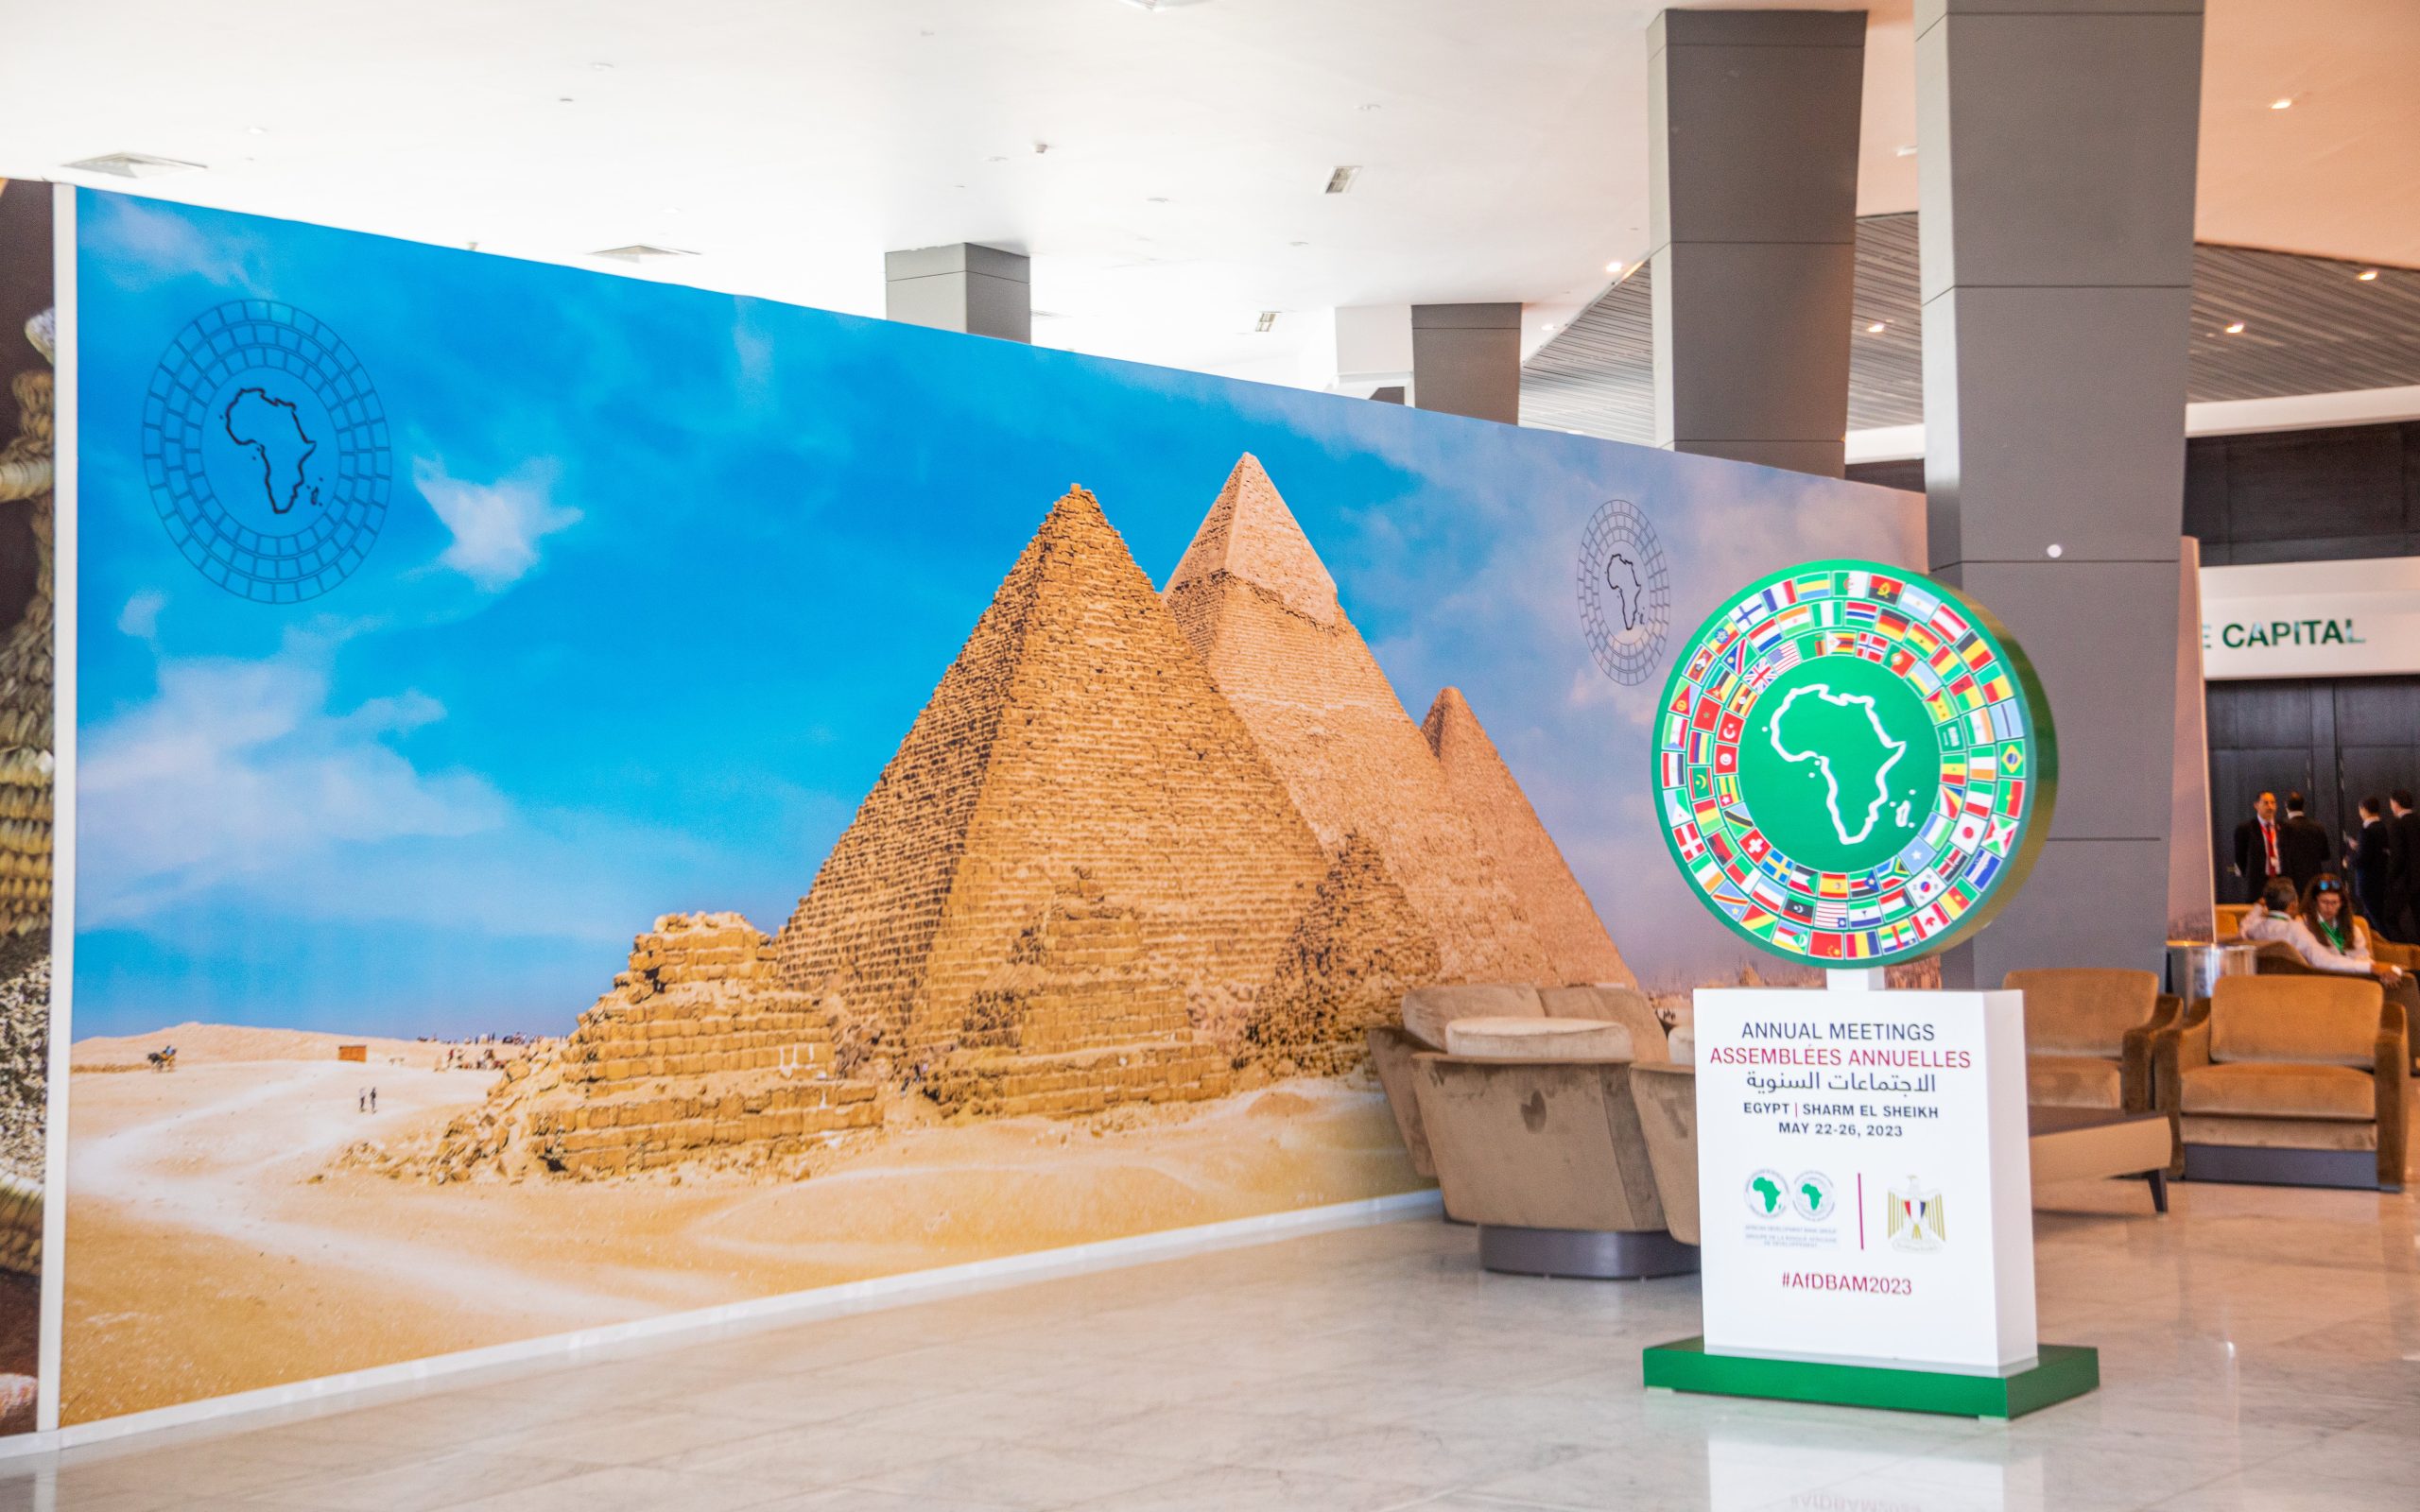 The African Development Bank's (AfDB) Annual Meetings in Sharm El-Sheikh